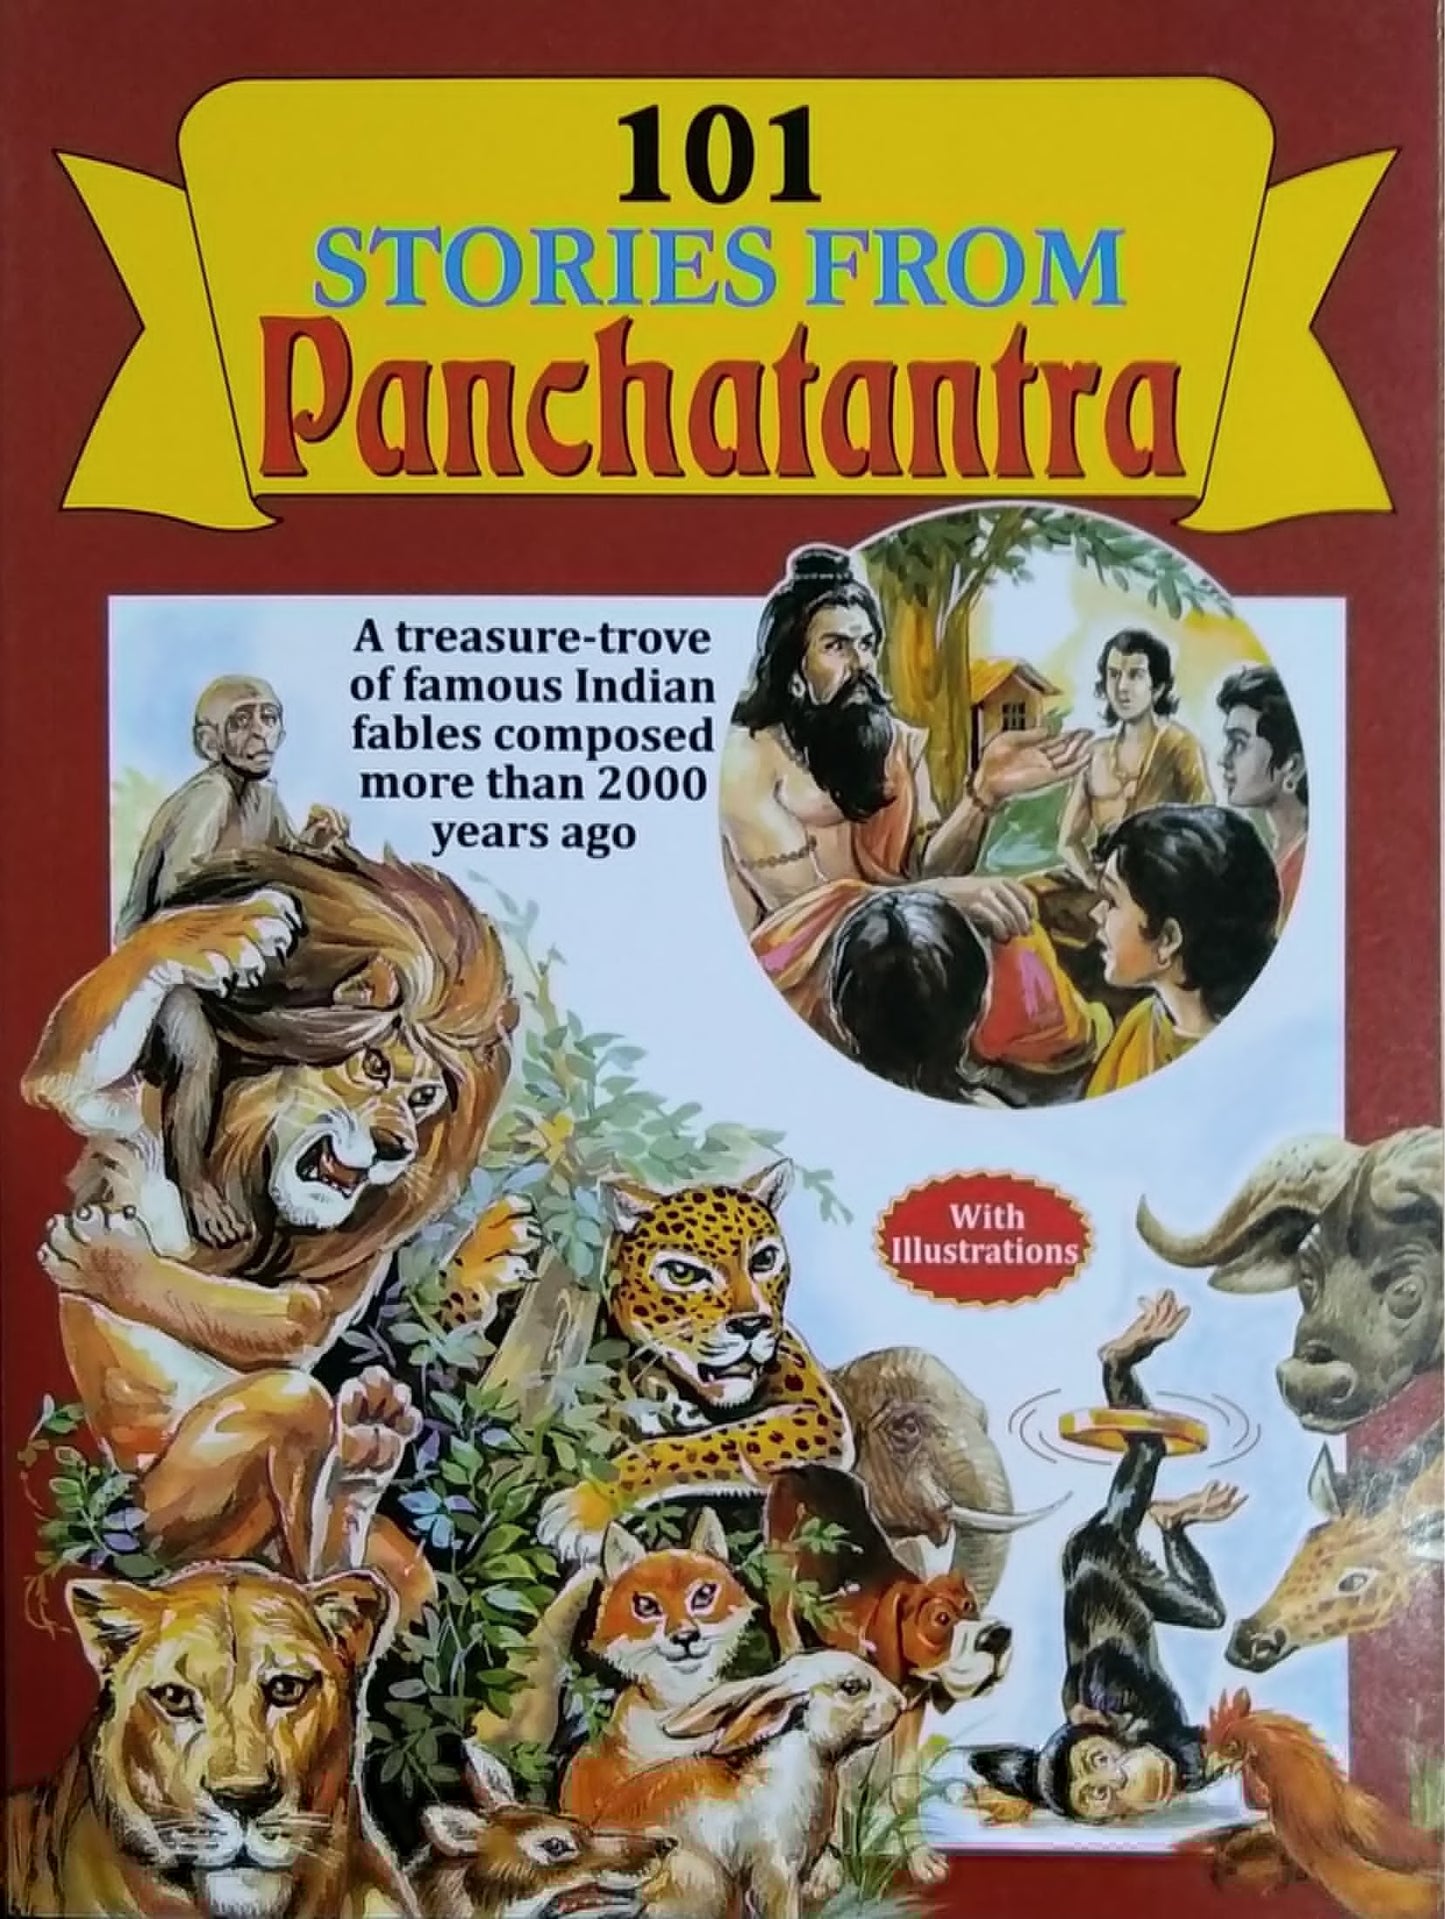 101 STORIES FROM Panchatantra